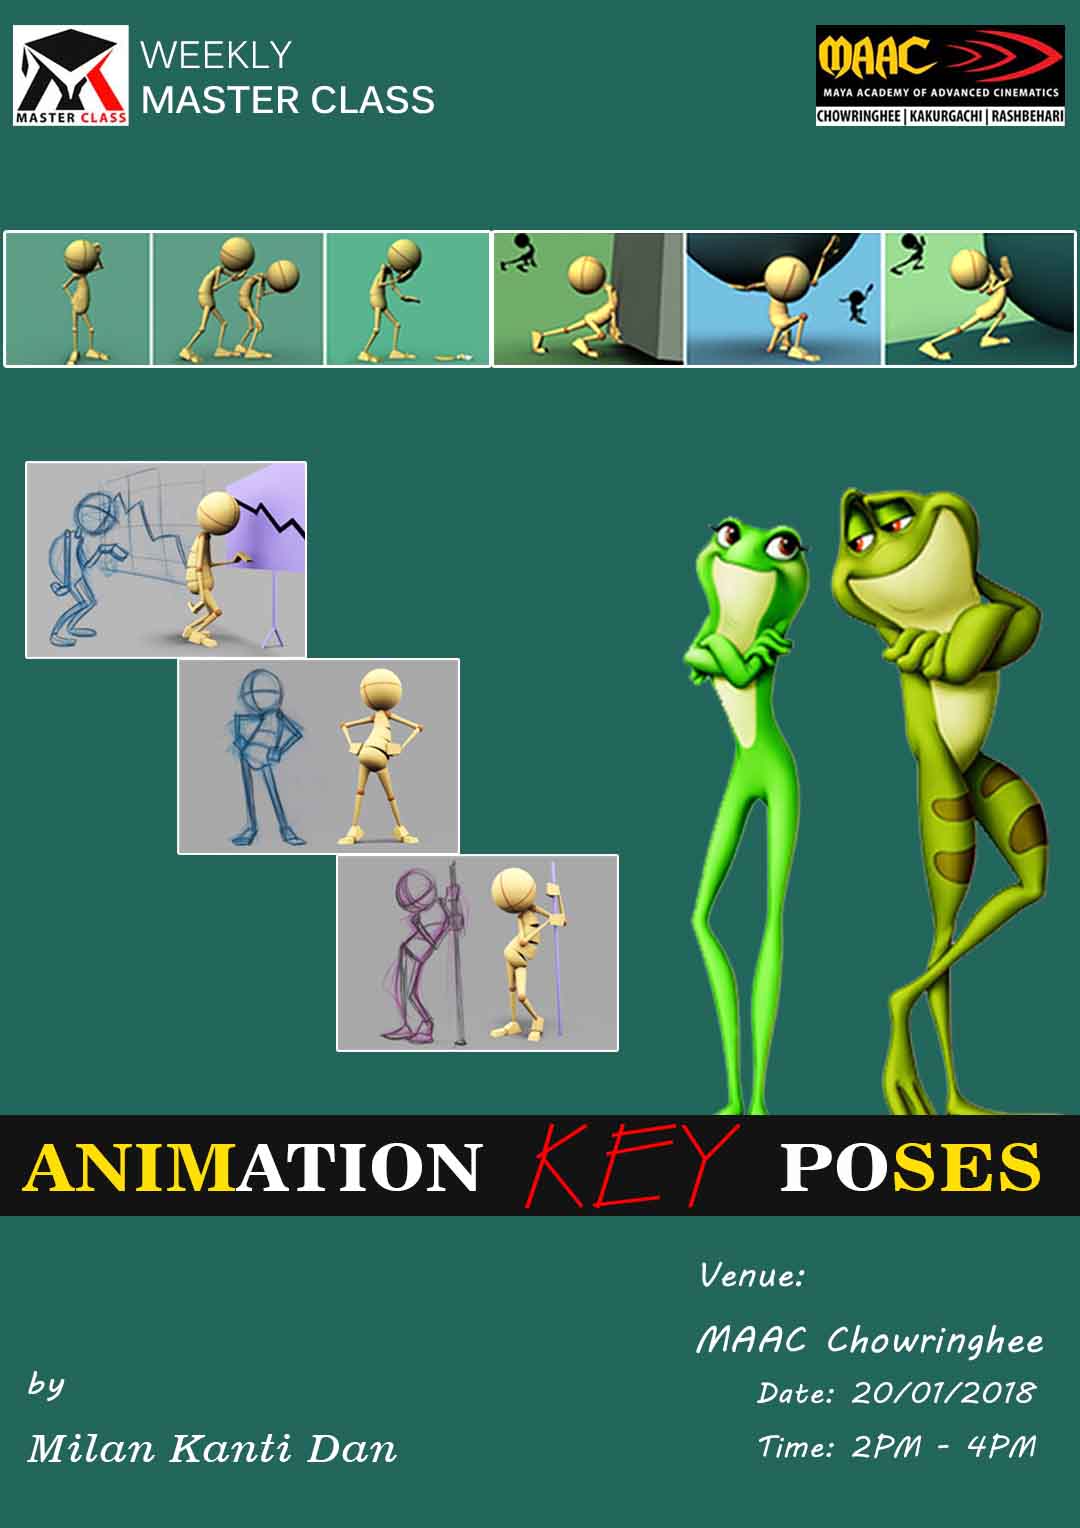 Weekly Master Class on Animation KEY Poses